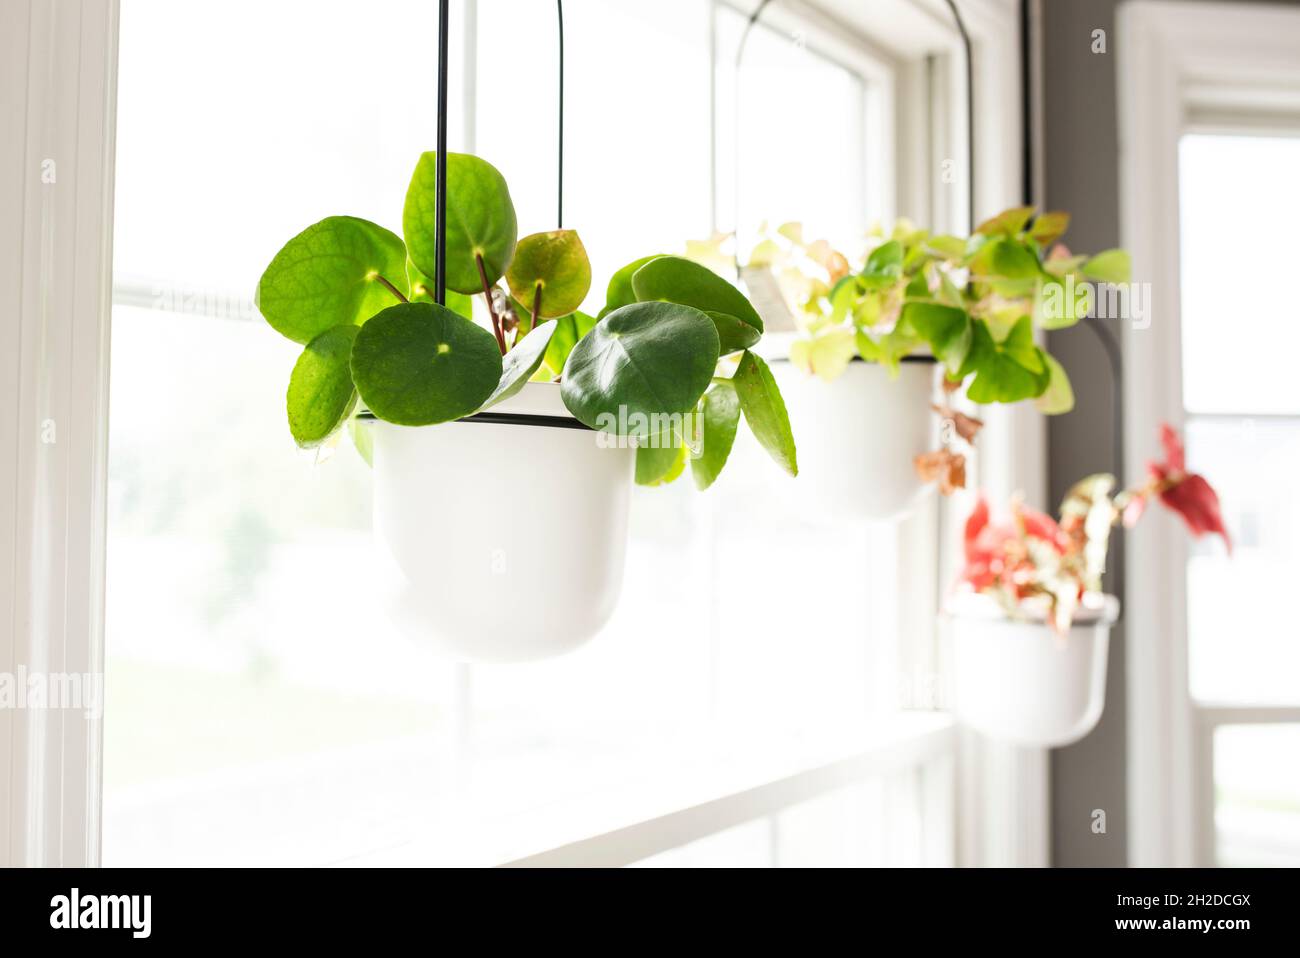 Three Potted Houseplants Hanging in a Sunny Window Stock Photo